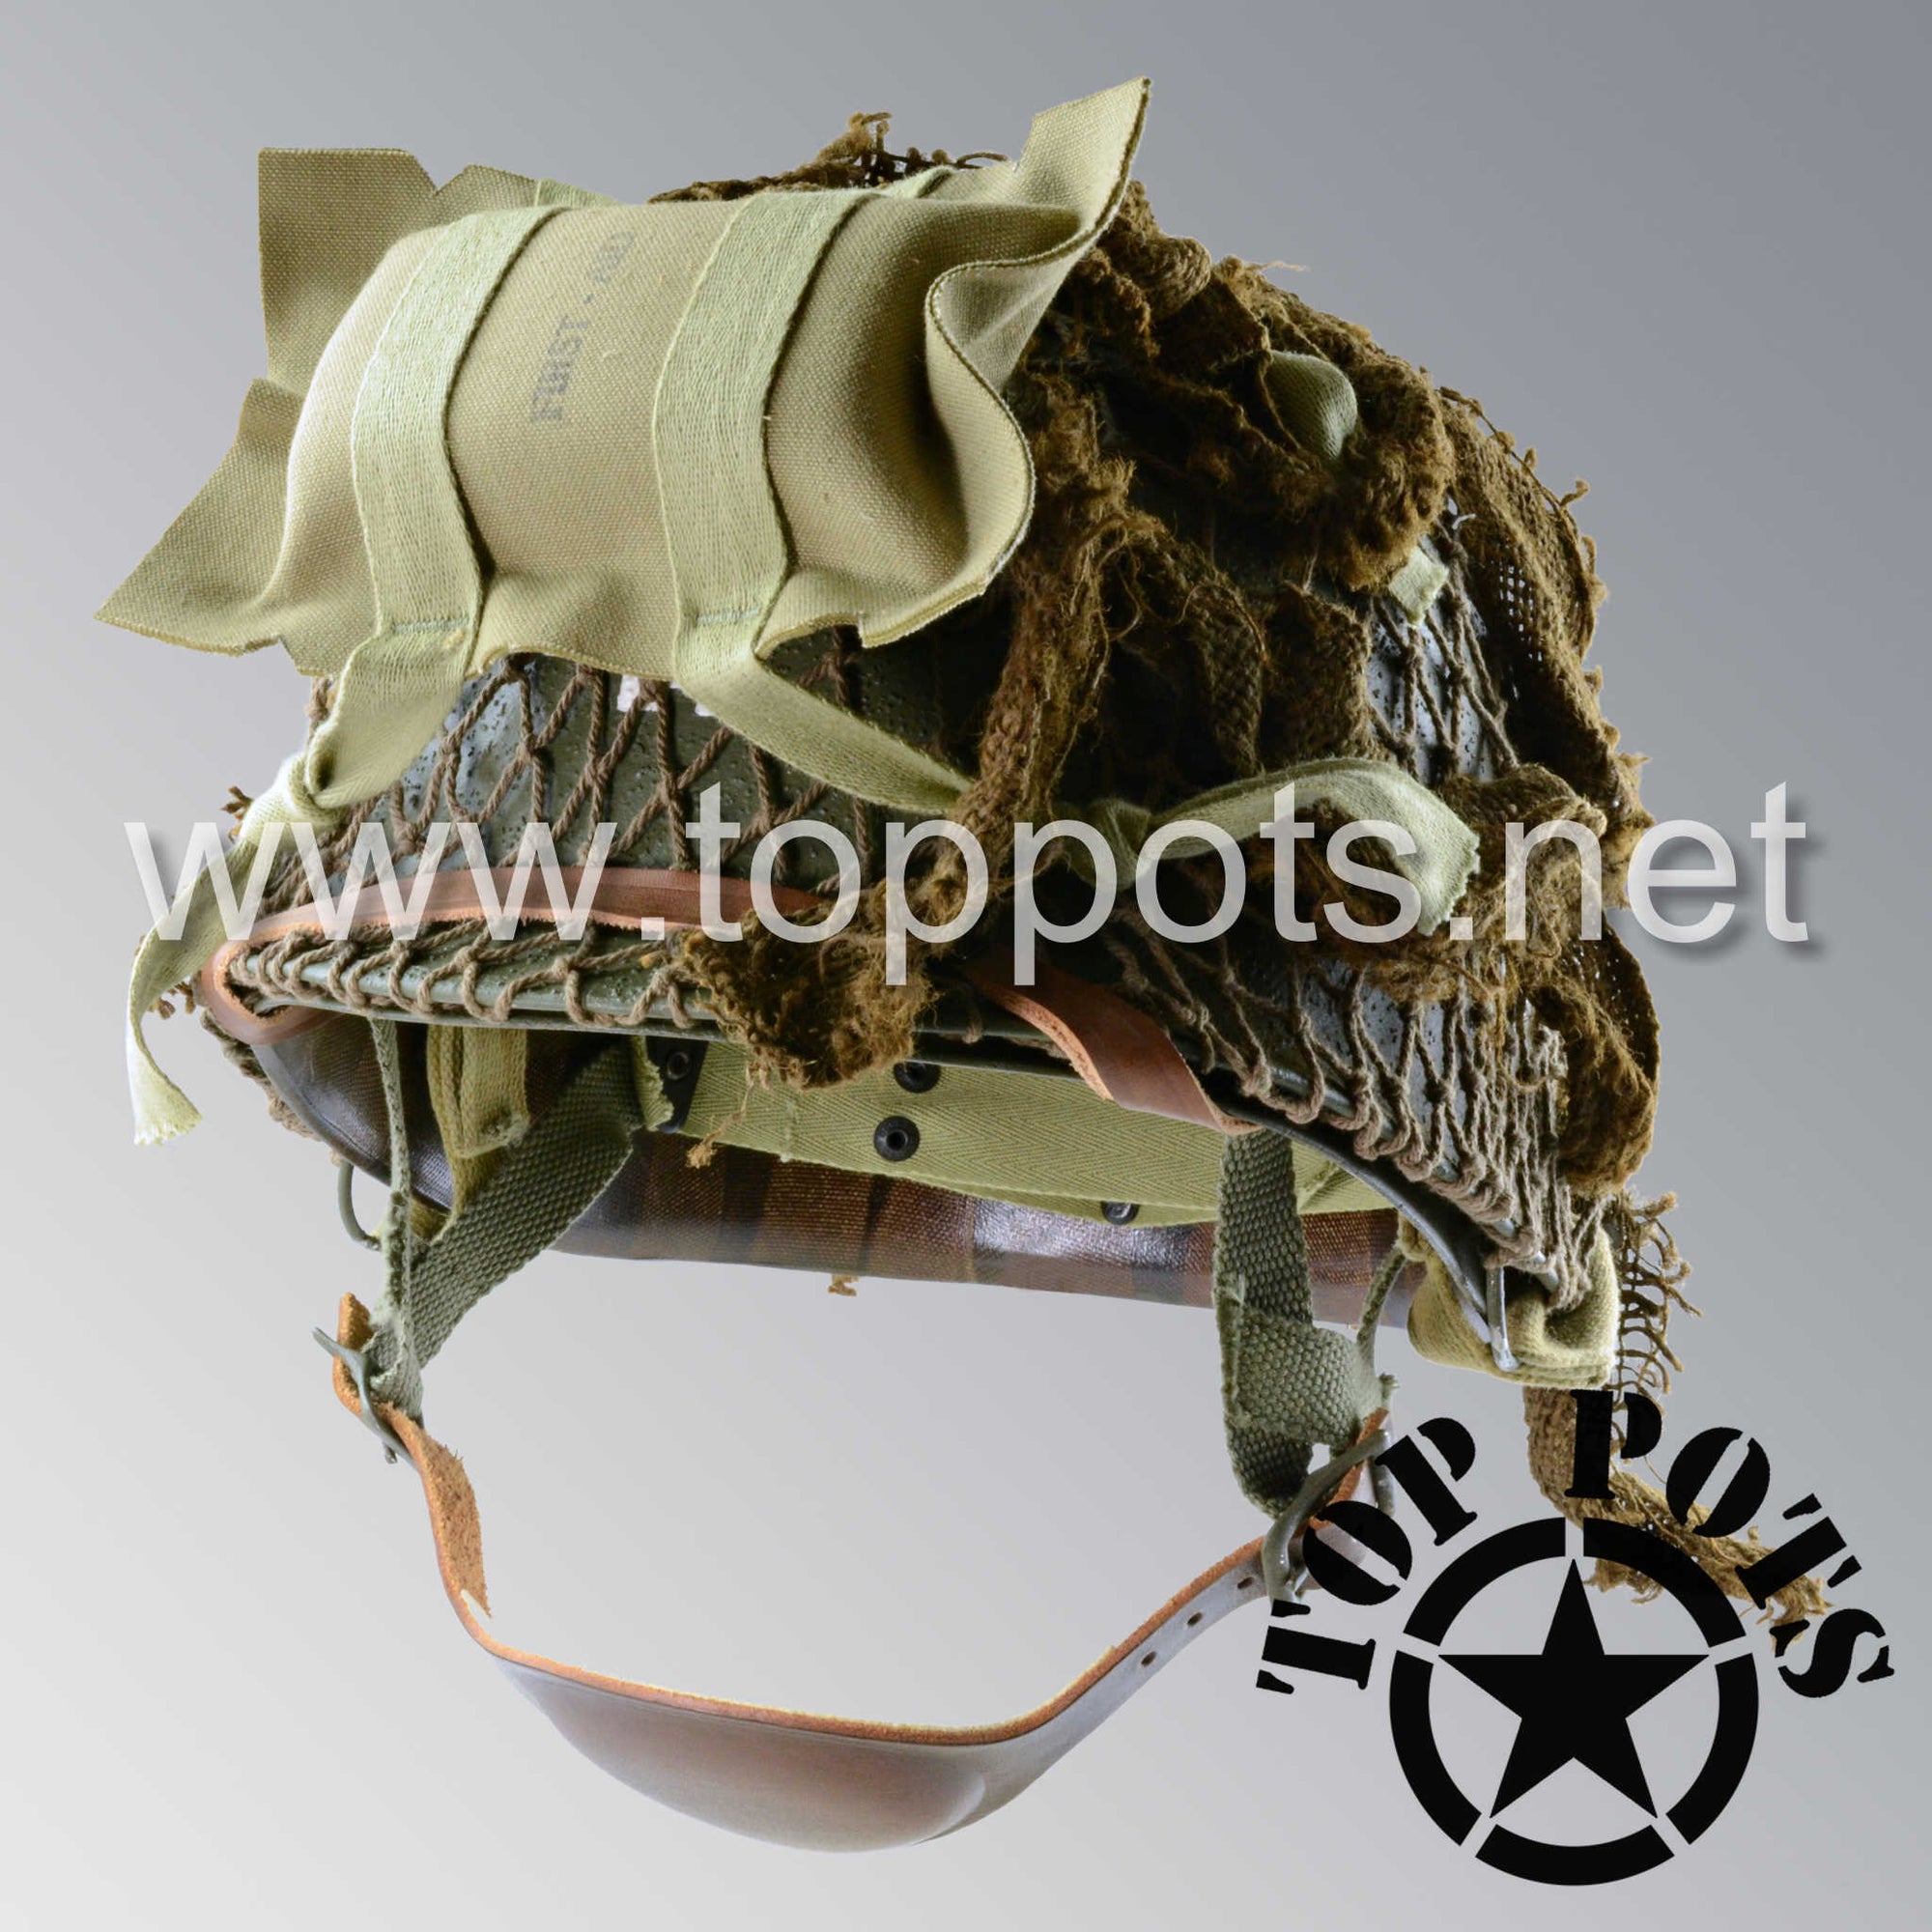 WWII US Army Restored Original M2 Paratrooper Airborne Helmet D Bale Shell and Liner with Net, Scrim and Medic Pack